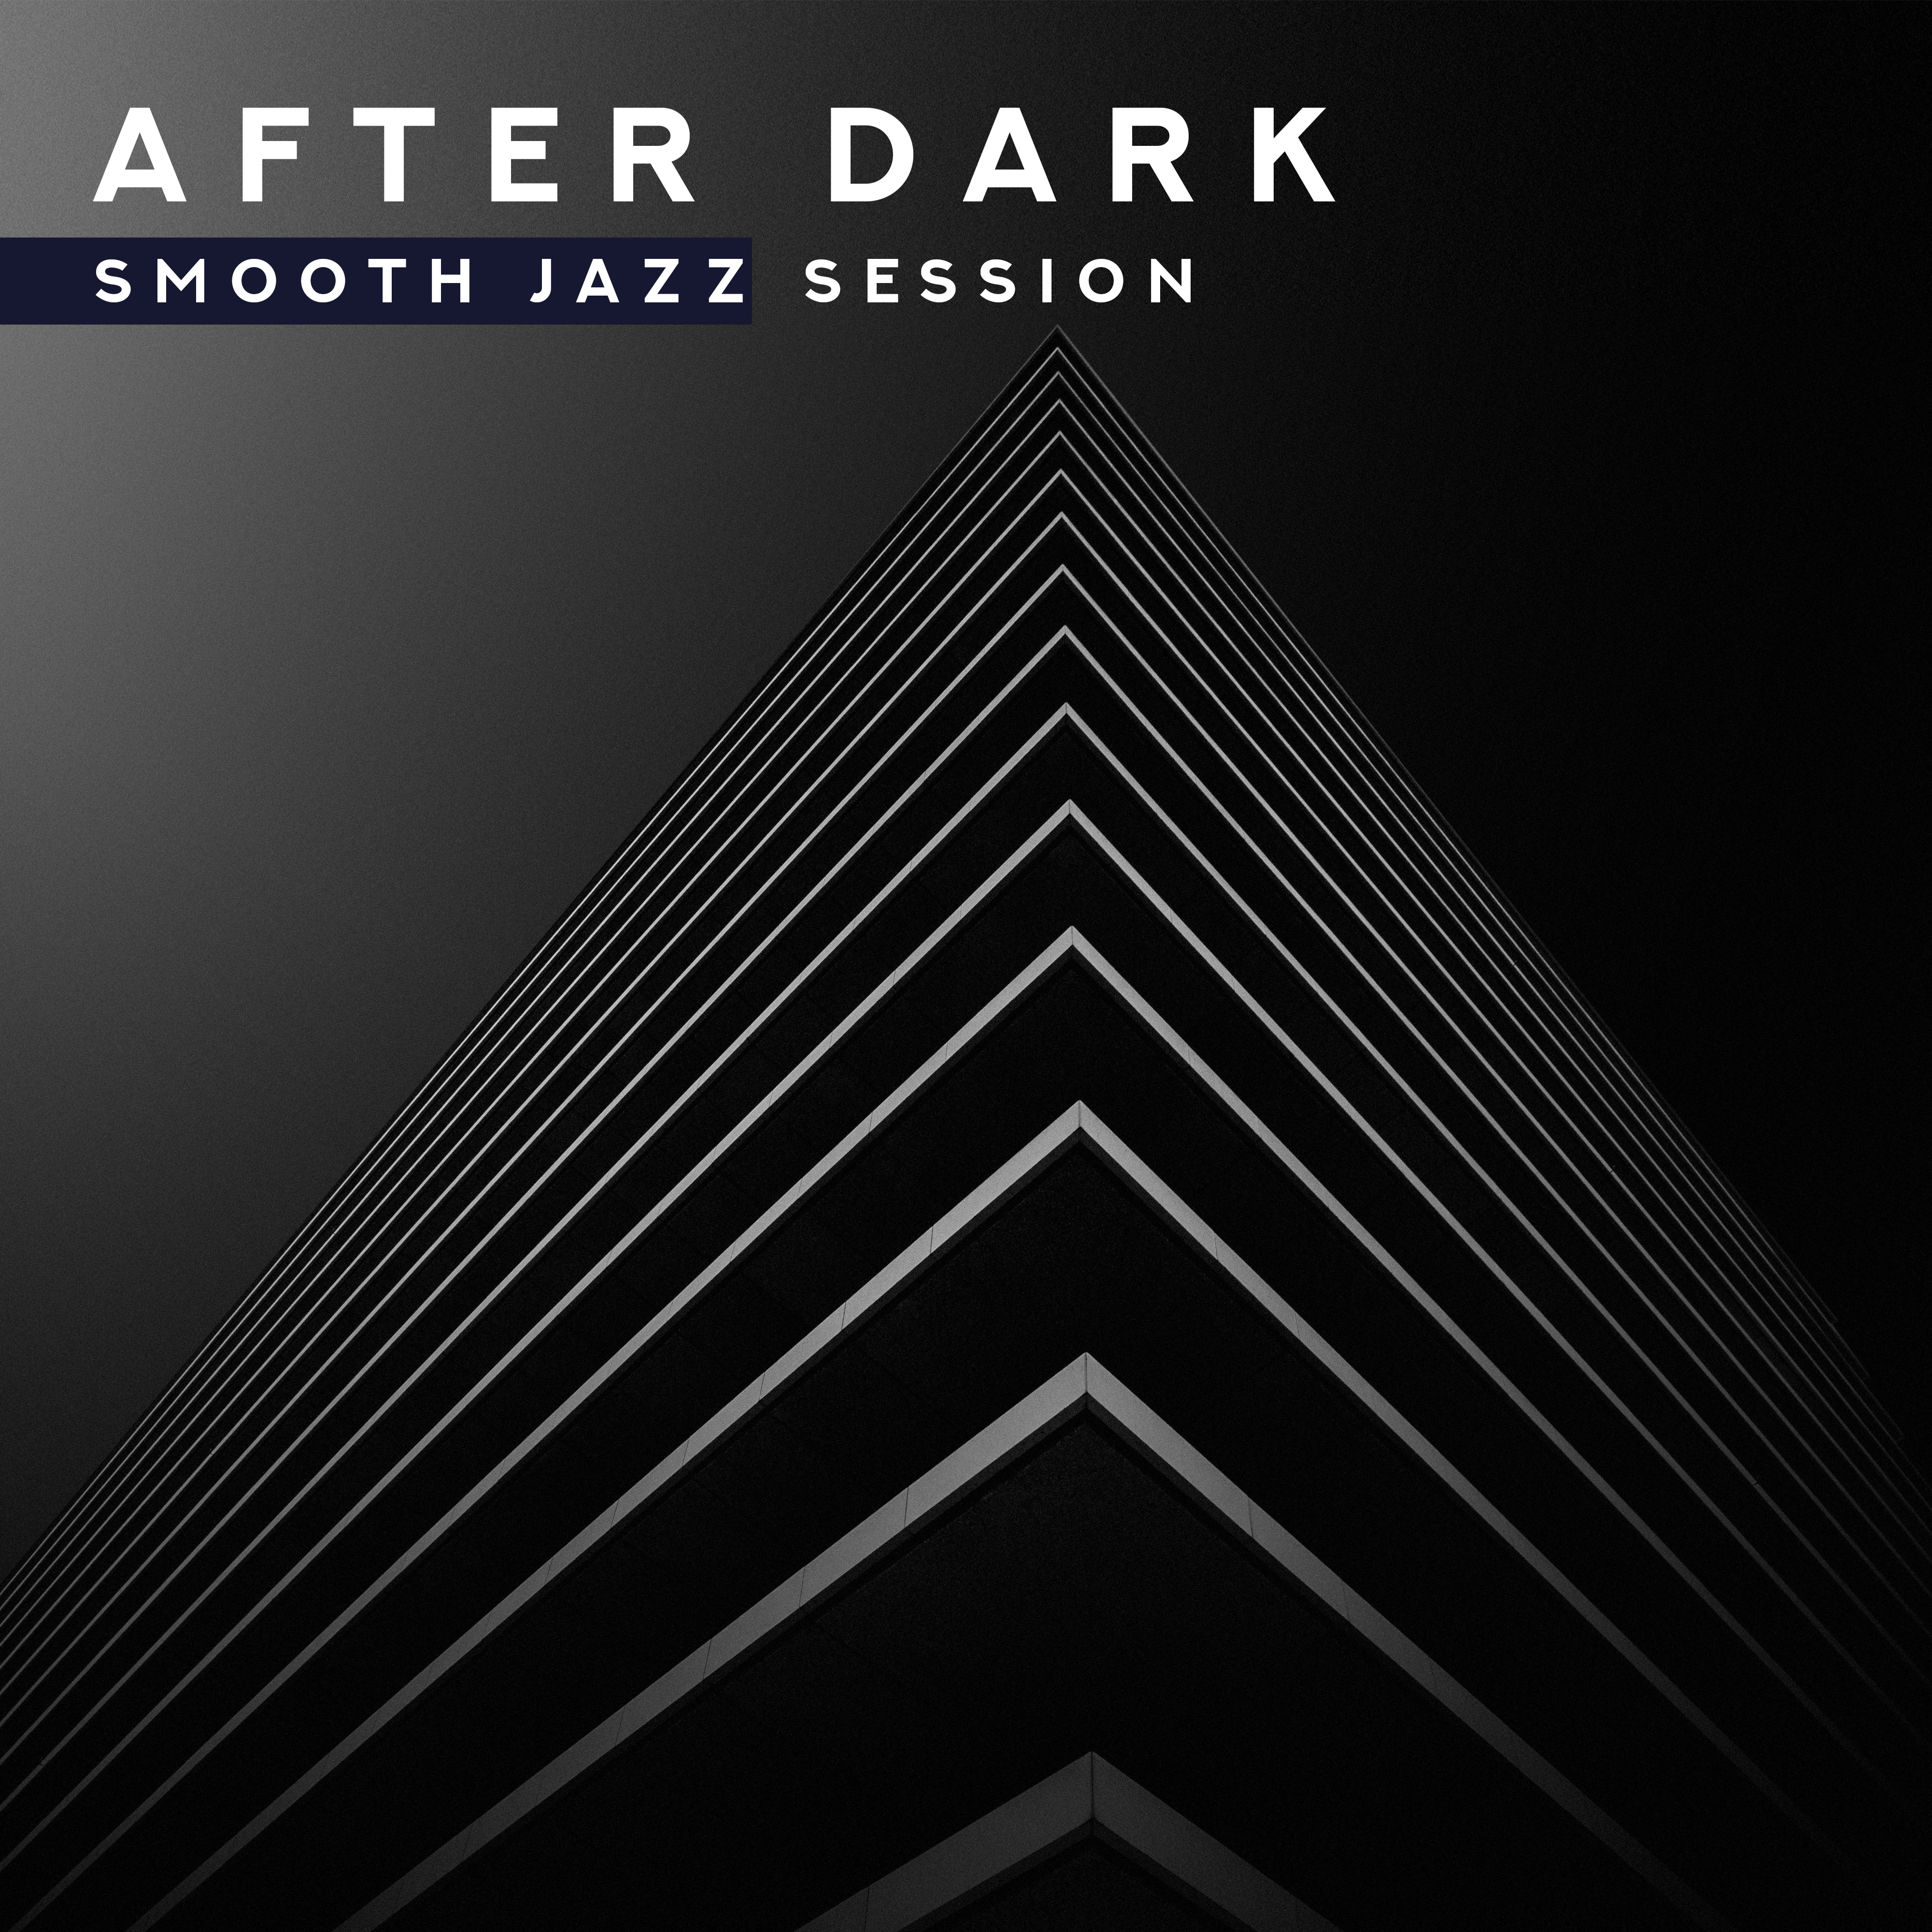 After Dark Smooth Jazz Session  Relax Night Jazz Music, Cocktail Party Songs